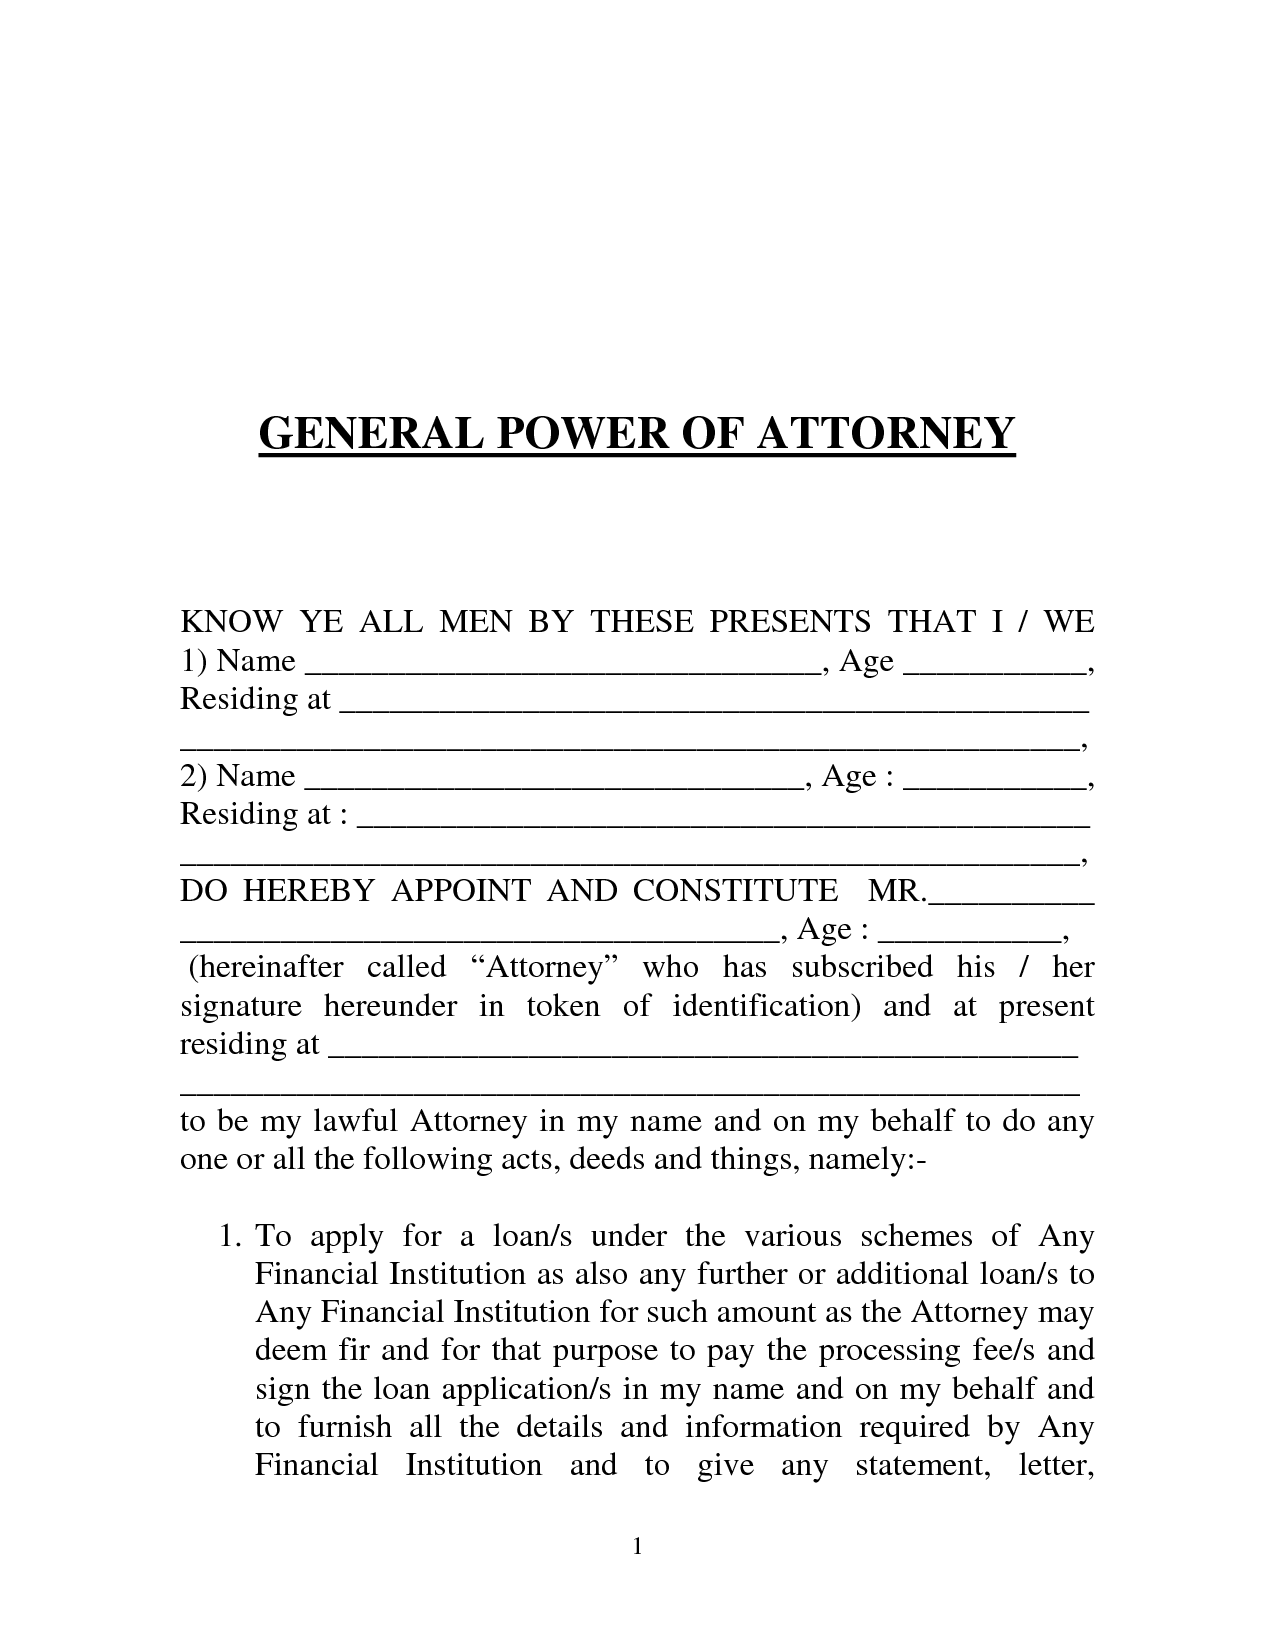 letter-of-attorney-free-printable-documents